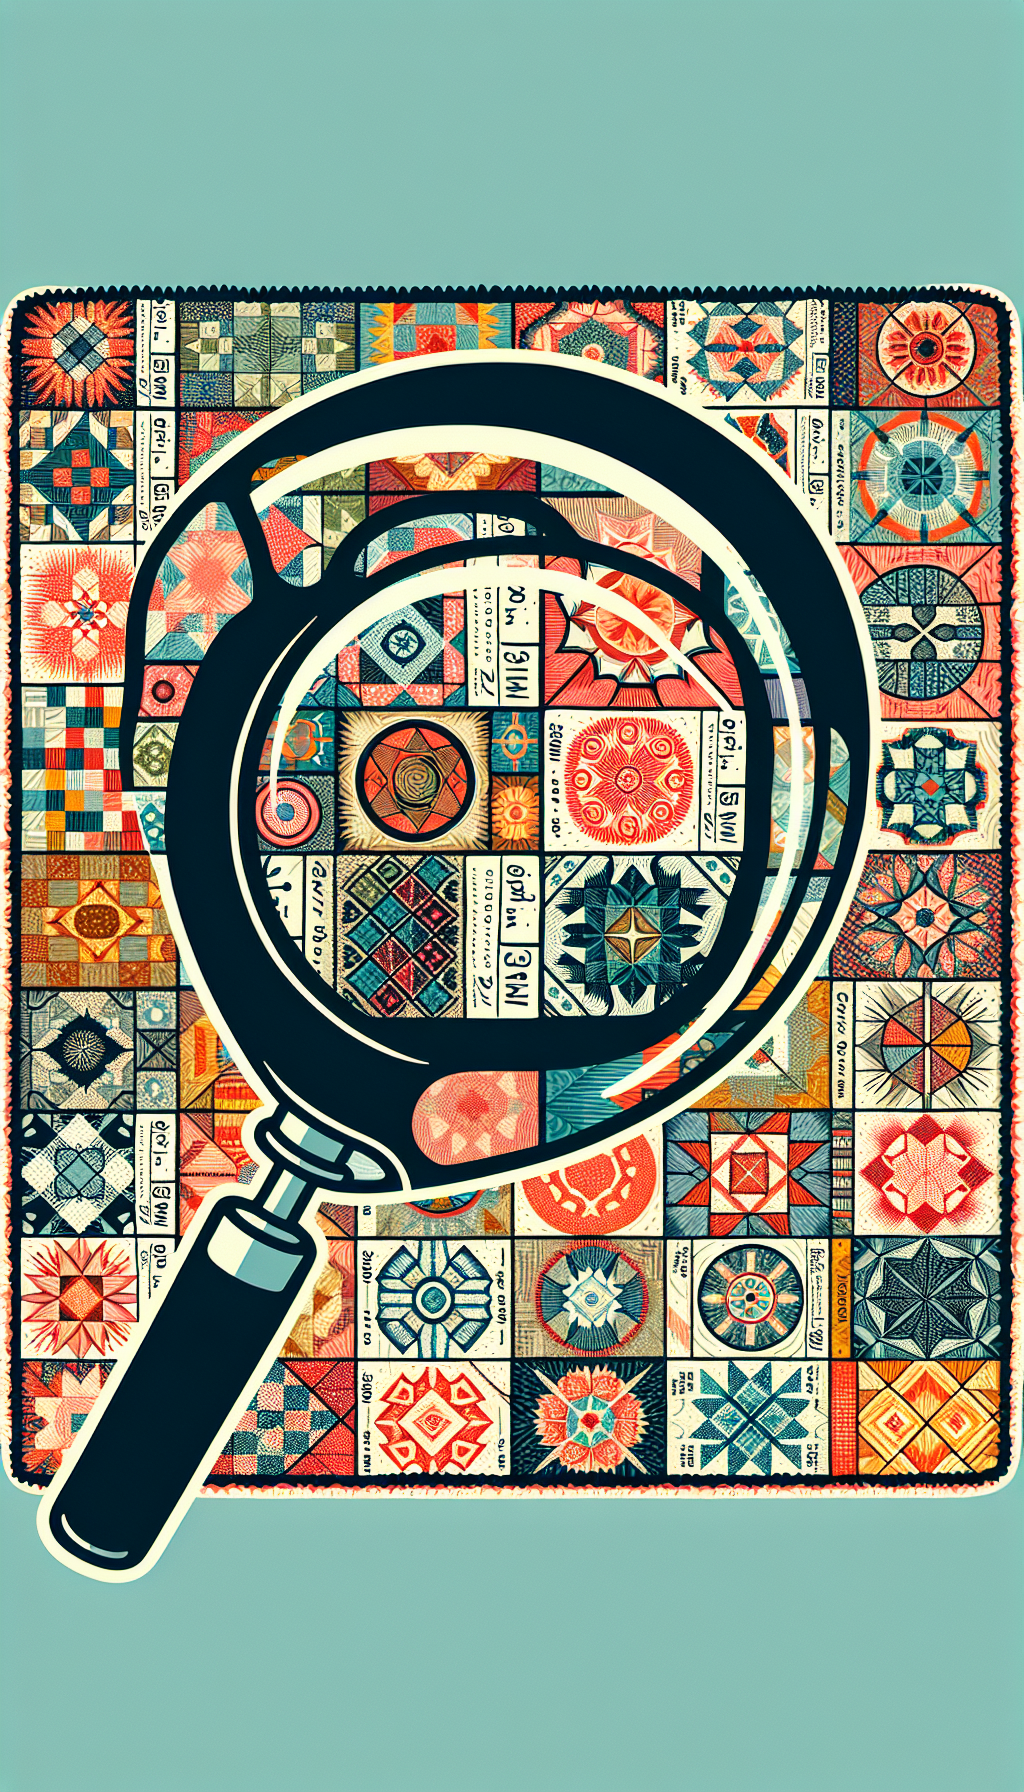 An illustration depicting a magnifying glass revealing a section of a vintage quilt, where each patch showcases a different, intricate Corningware pattern. Underneath the glass, the patterns become sharp and bear labels with their names and years, while outside the magnifying scope, they blur into a sea of retro hues, alluding to the hunt for rare, identifiable Corelle designs.